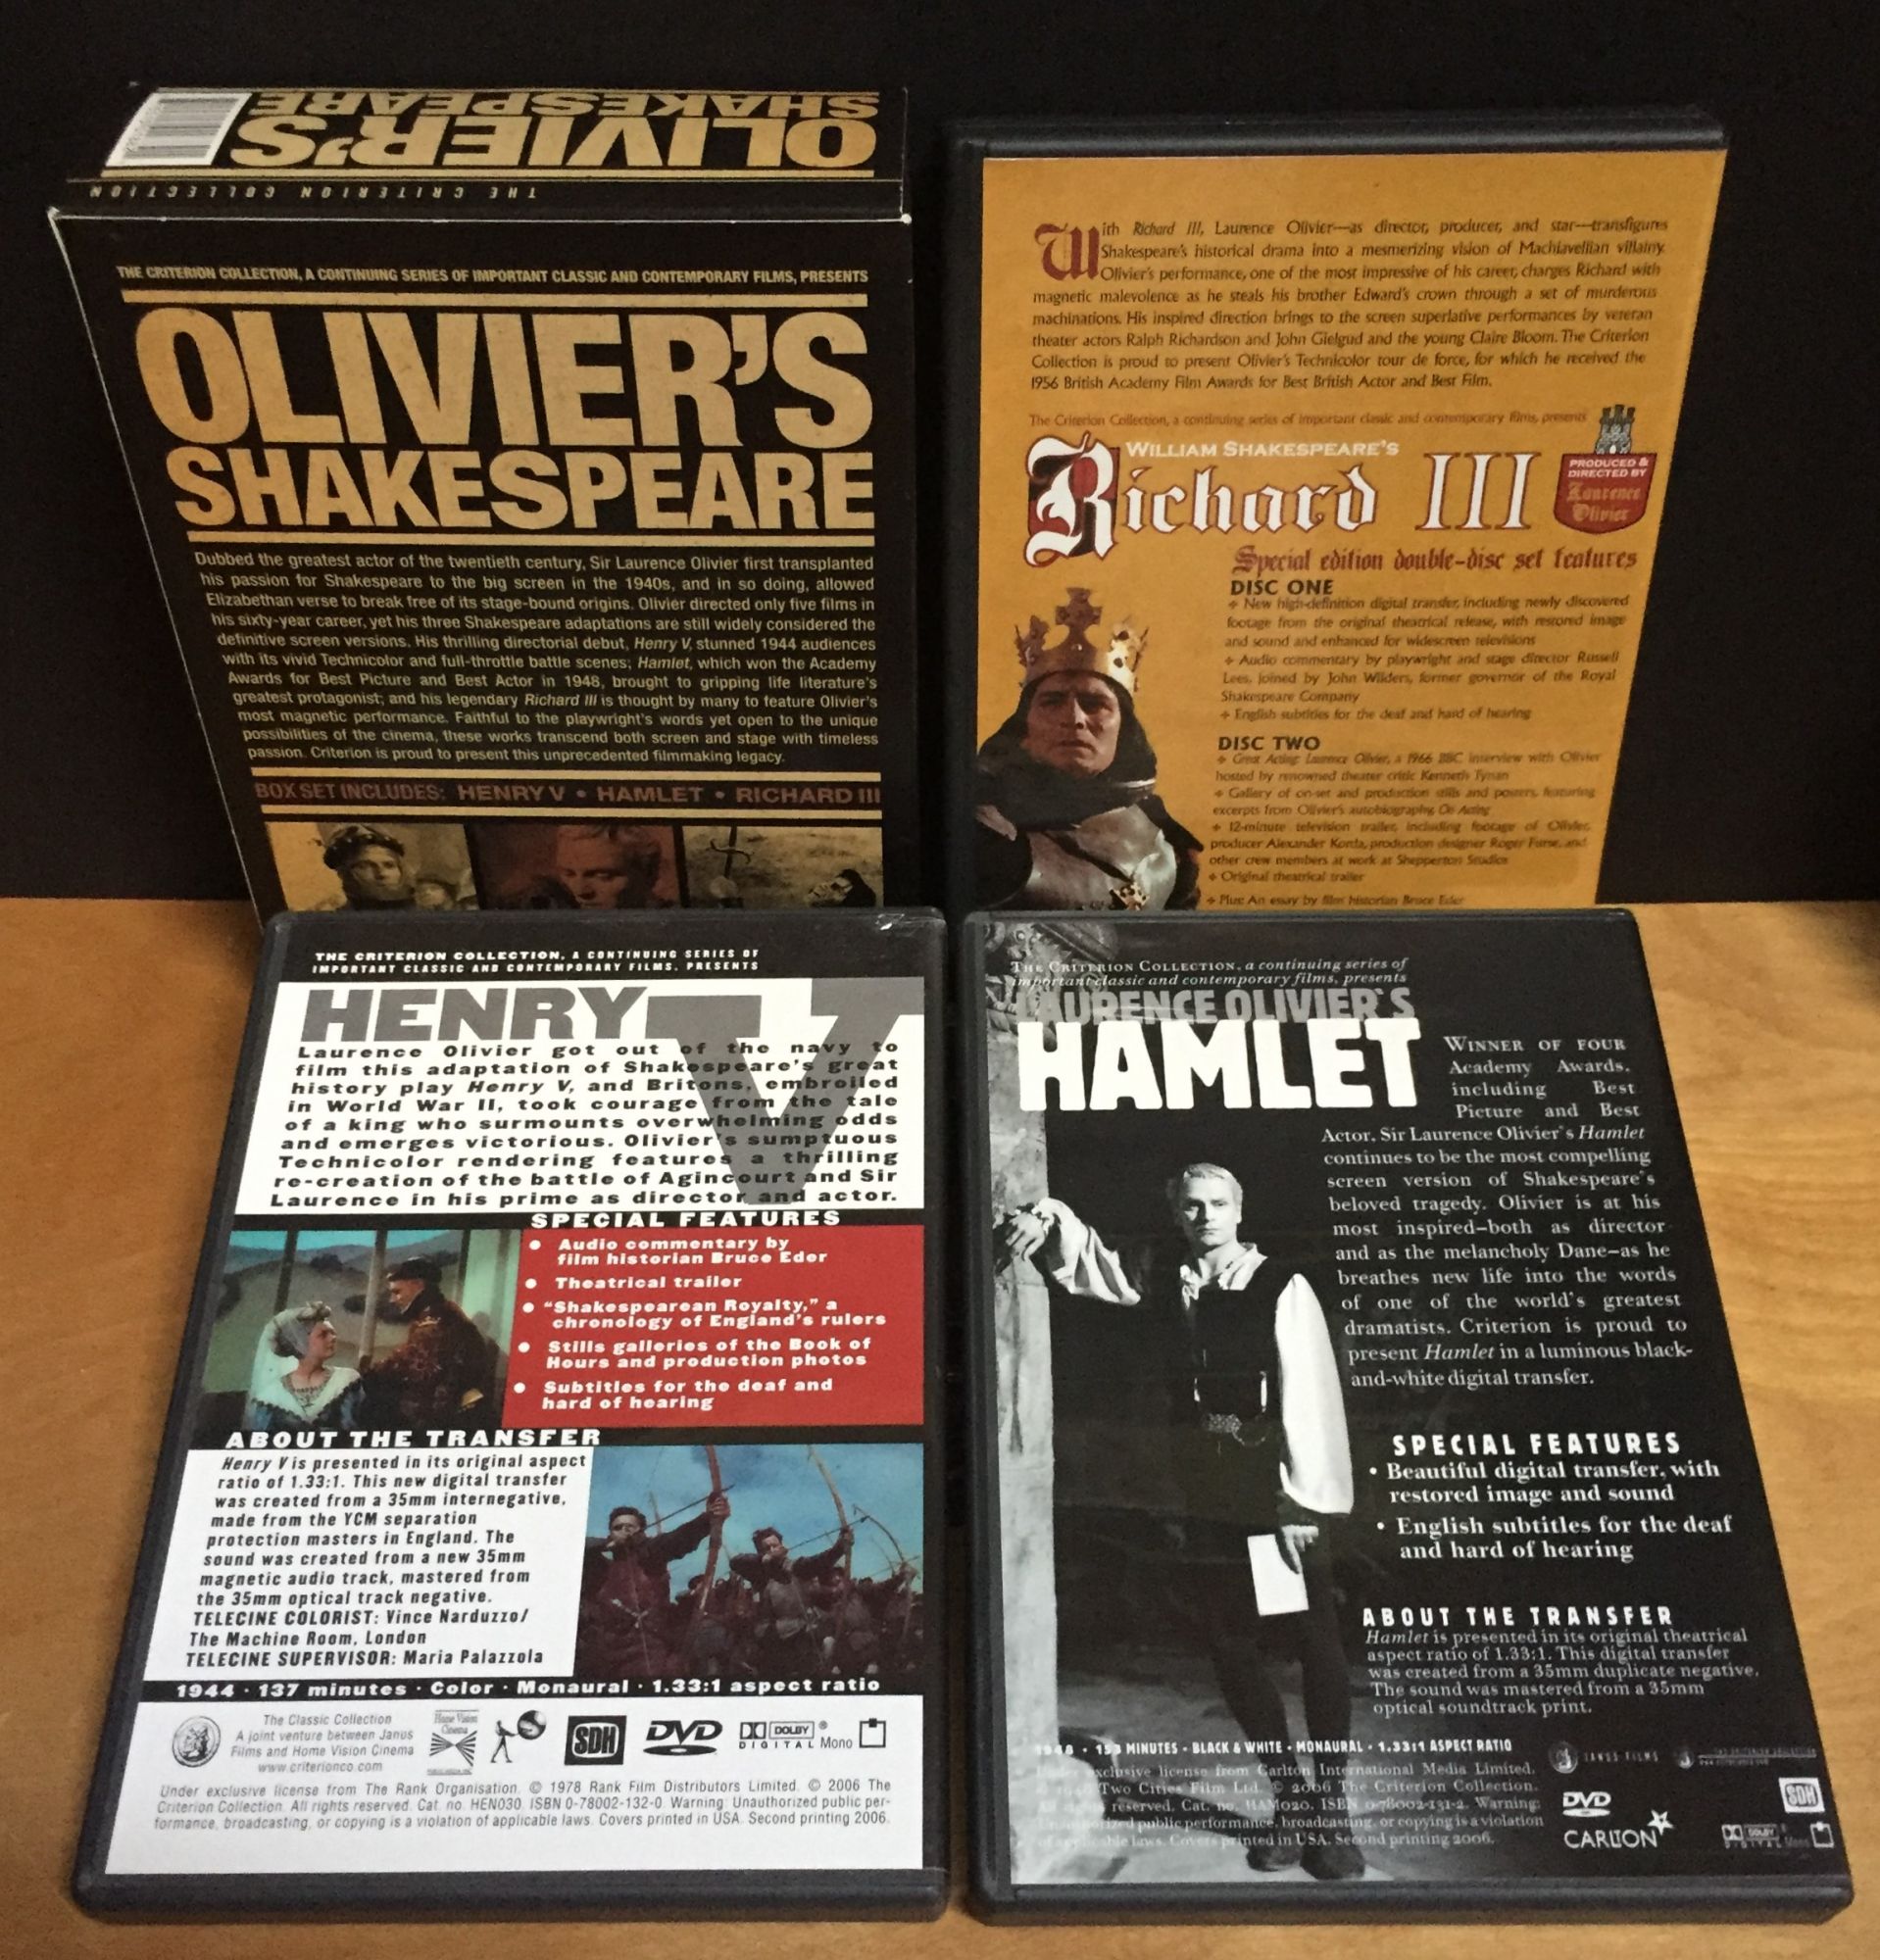 The Criterion Collection edition of writer/director Olivier